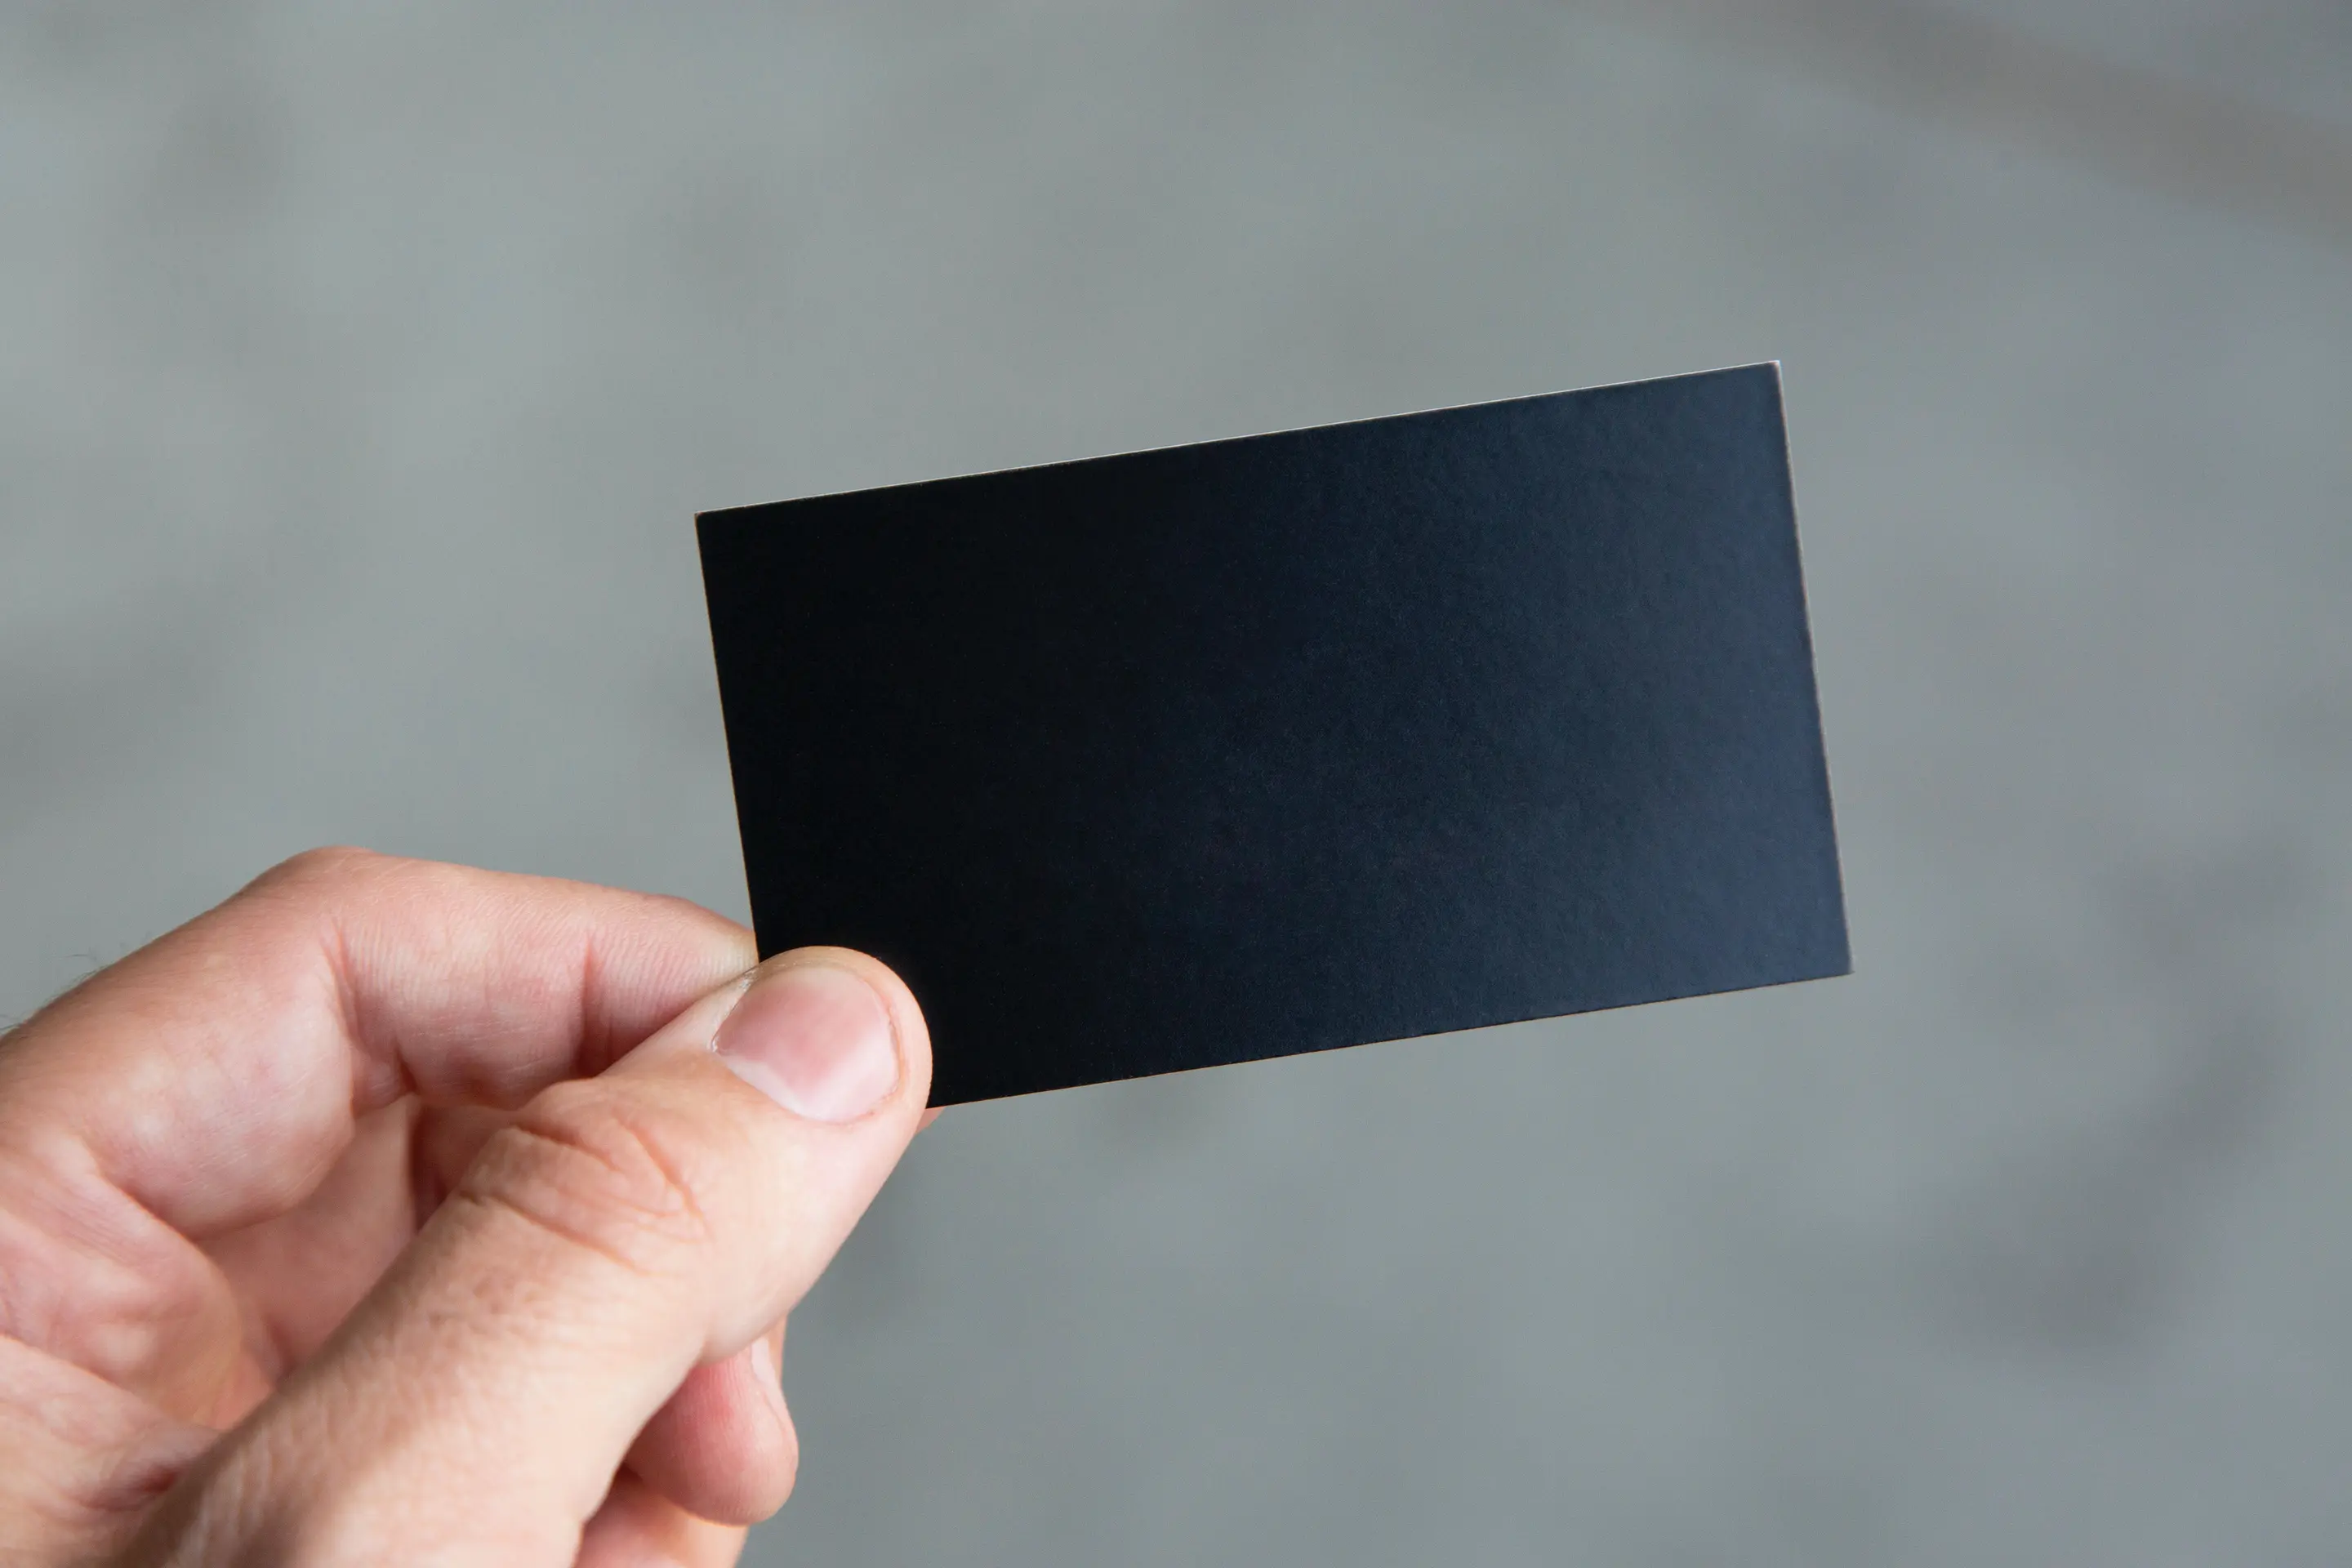 A paper card representing the simplest implementation of a loyalty program